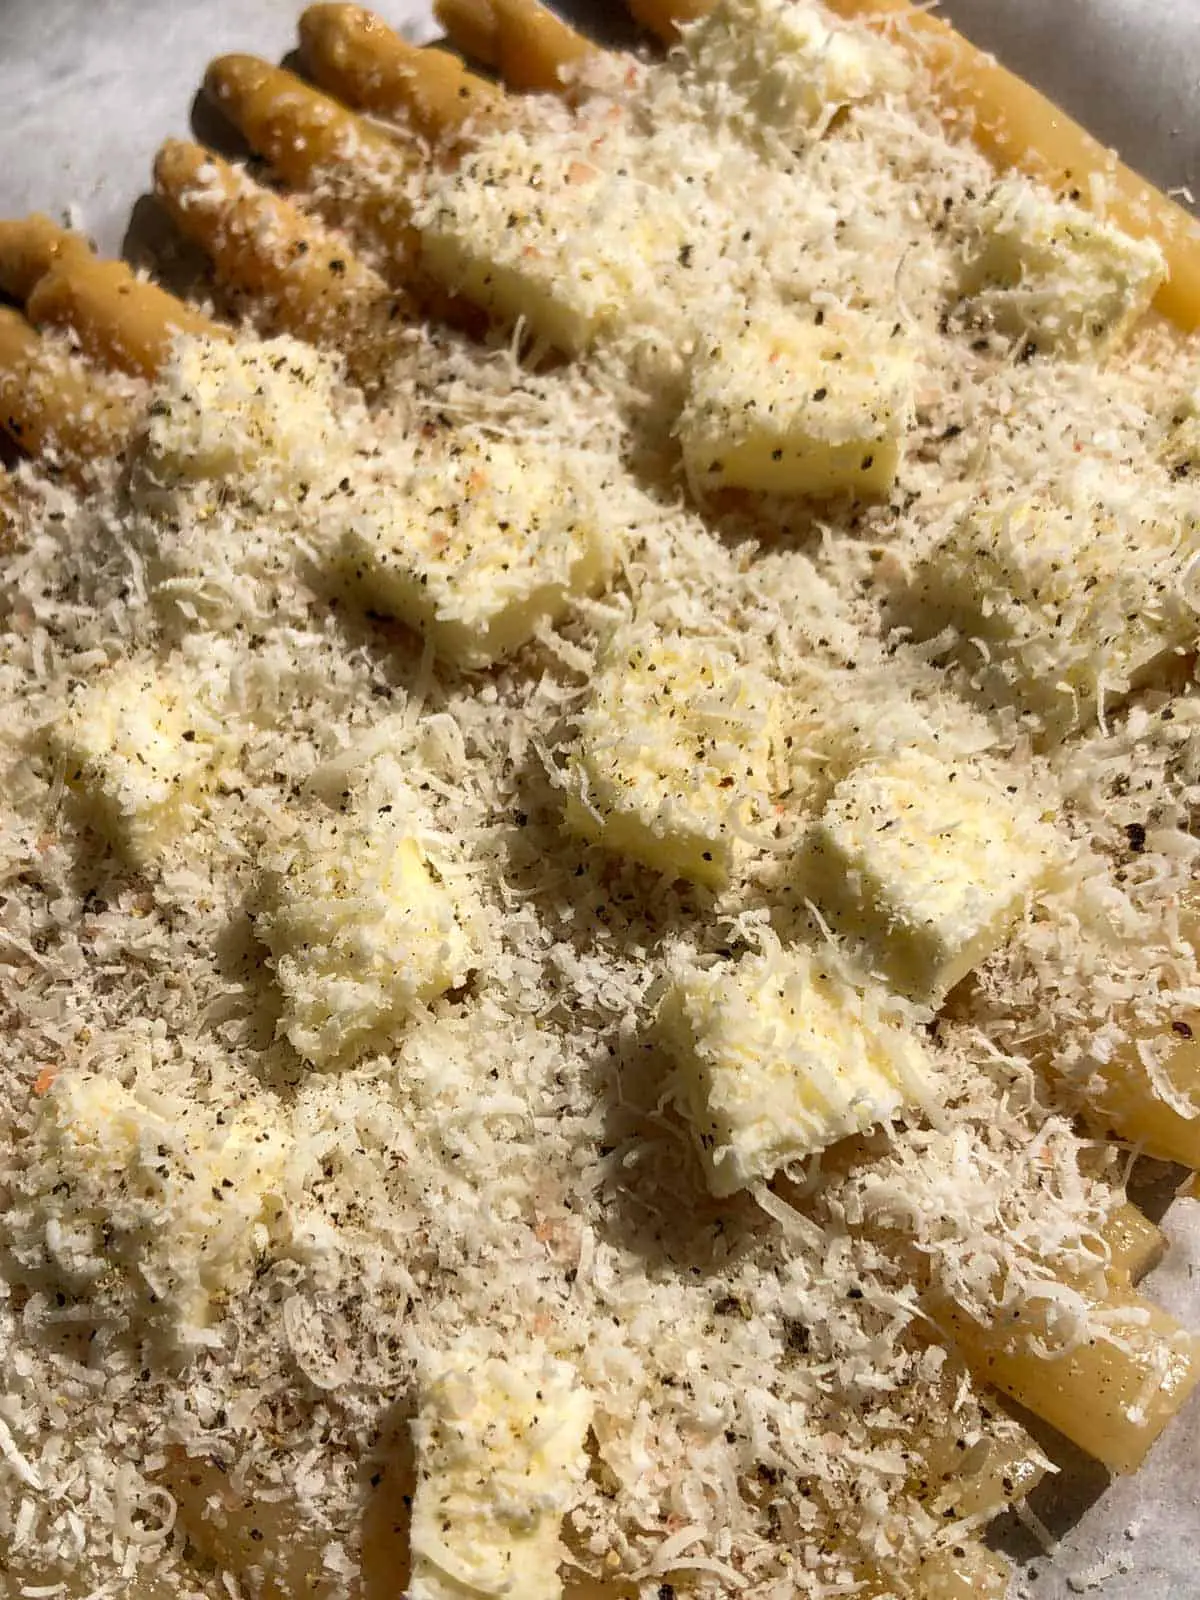 White asparagus spears topped with dots of butter, grated Parmesan cheese, and seasonings.